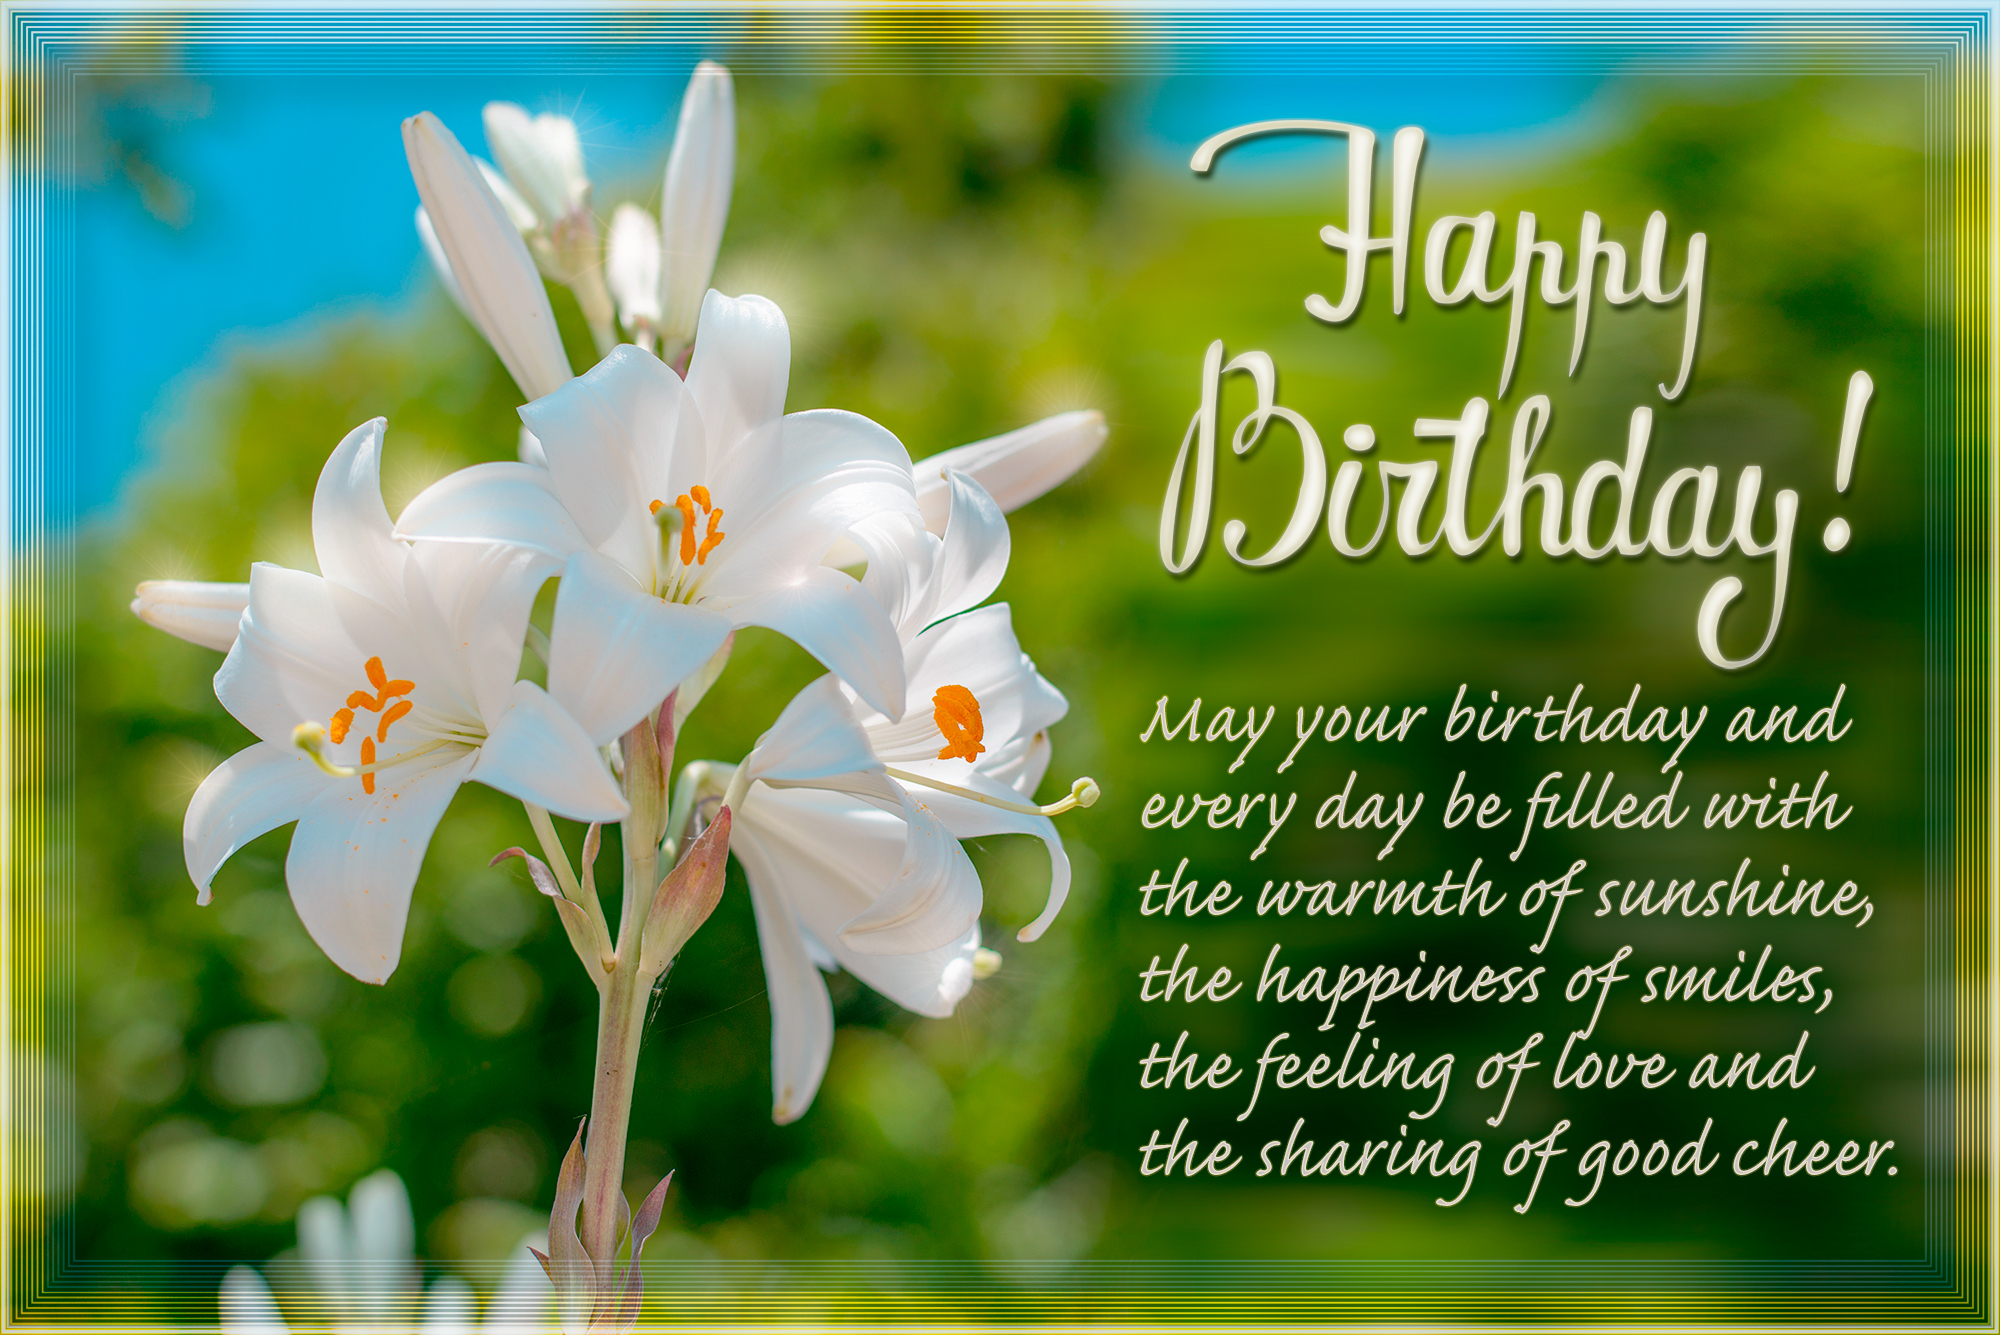 Happy Birthday Card with Flower | Gallery Yopriceville ...